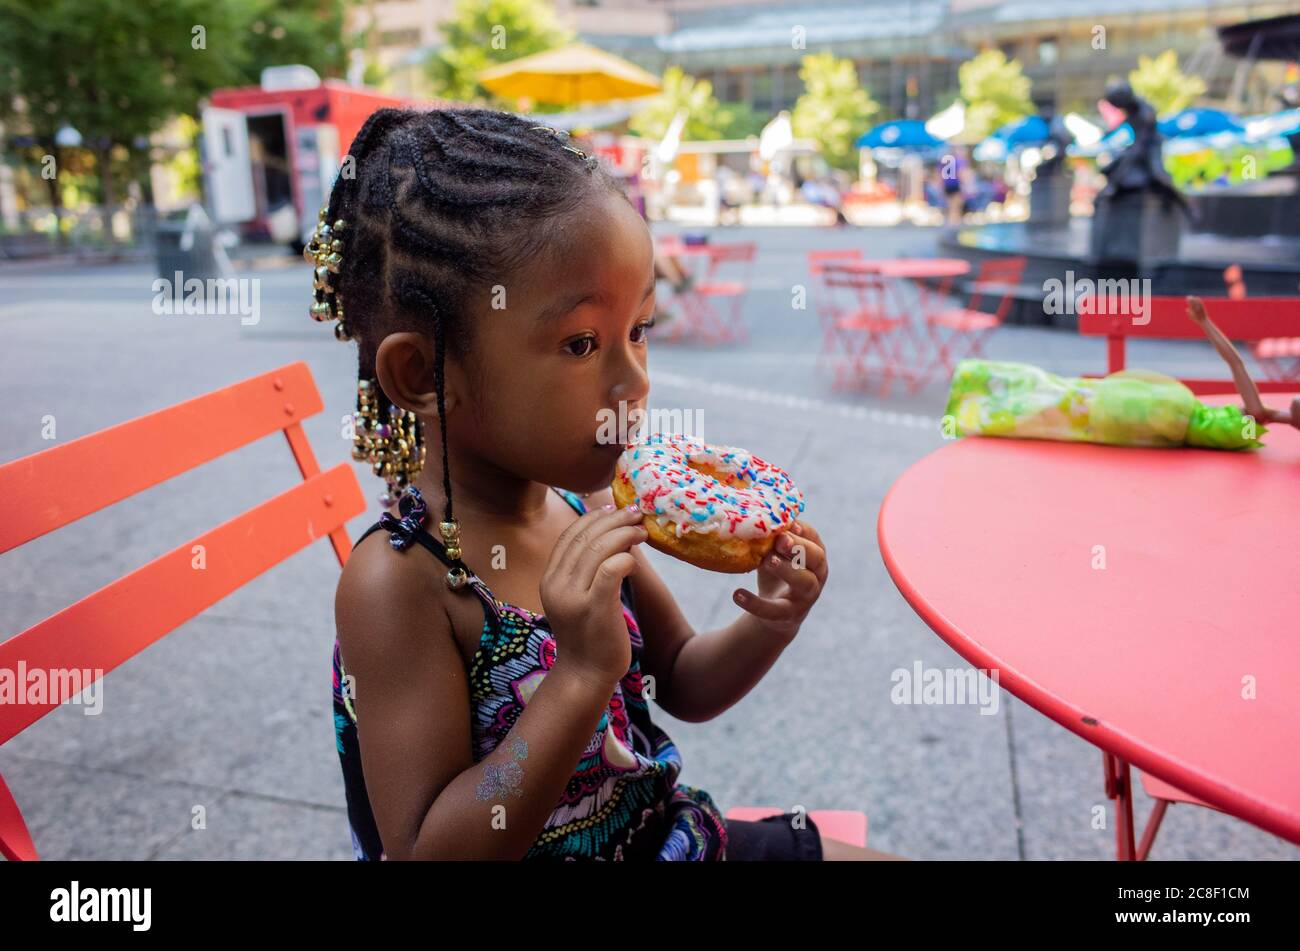 4-5 year old Black girl enjoying a donut on a sunny day. Stock Photo